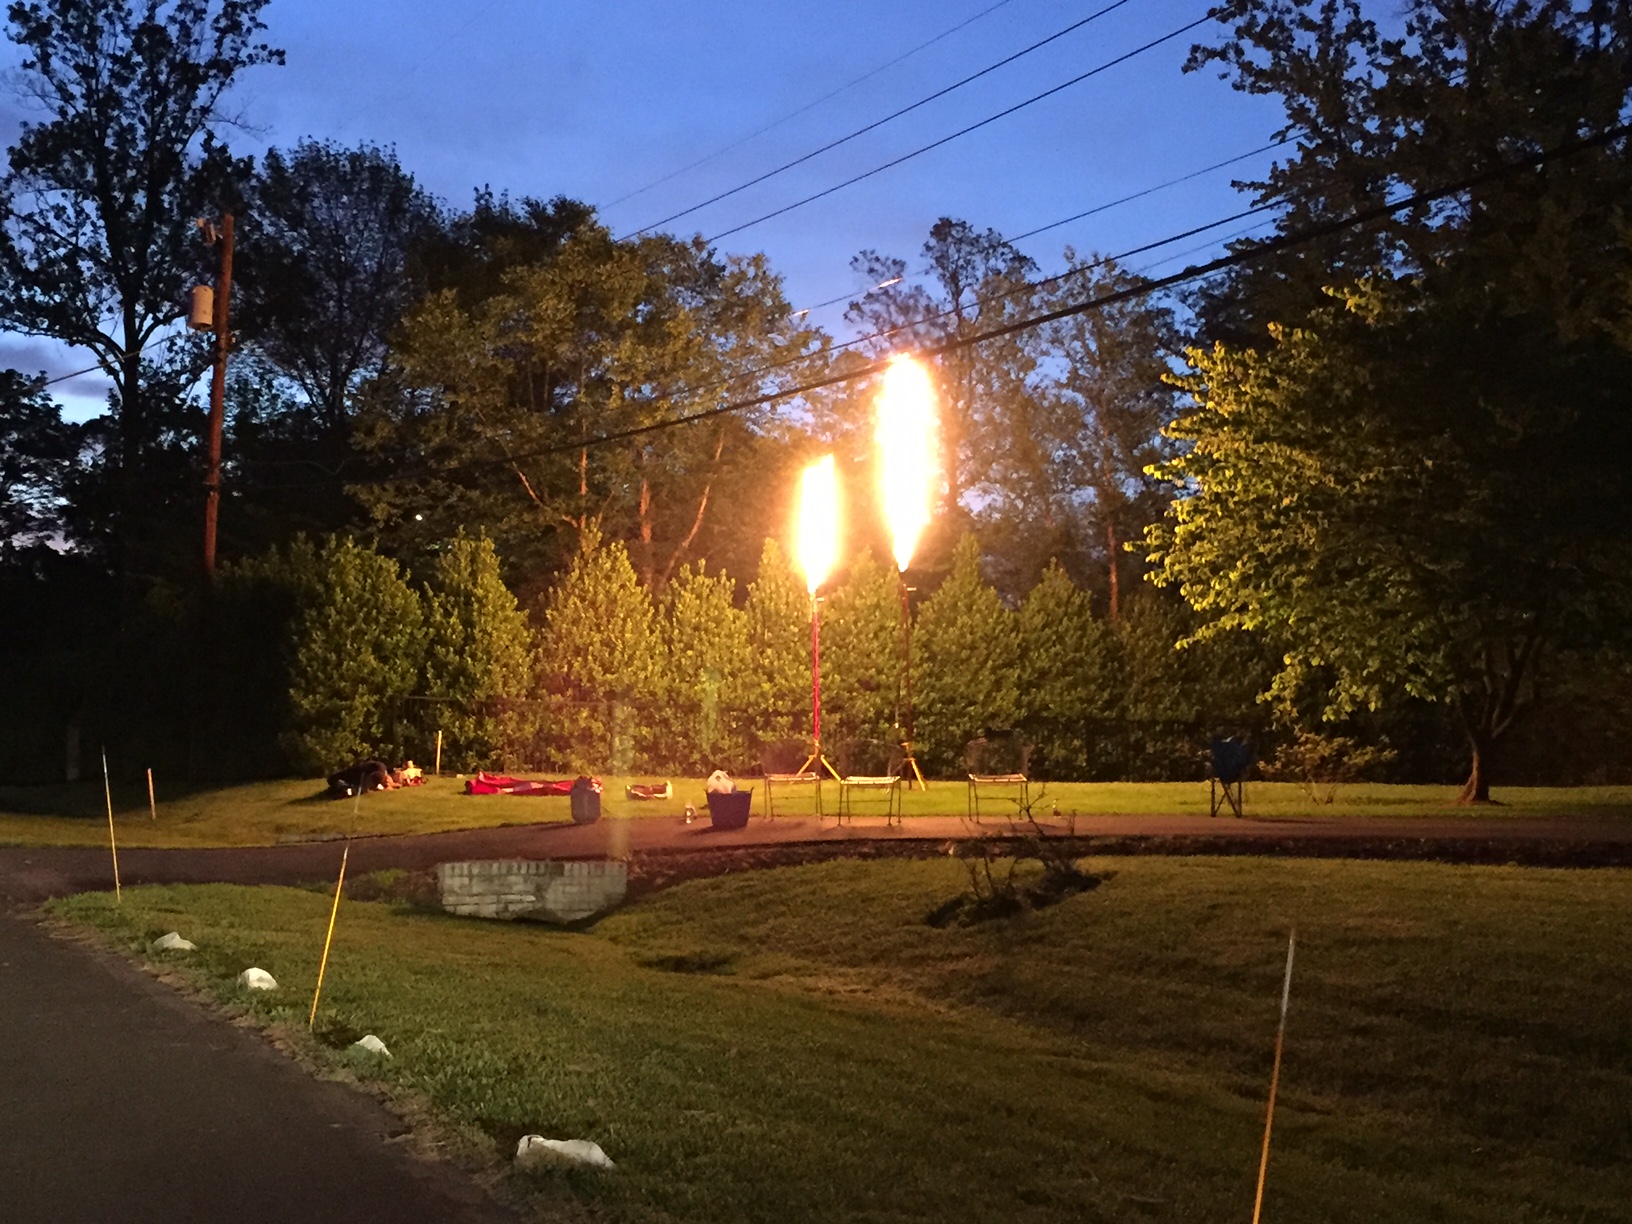 The scene of a gas leak in Potomac, Md. on Sunday, May 29, 2016. (WTOP/Dennis Foley)